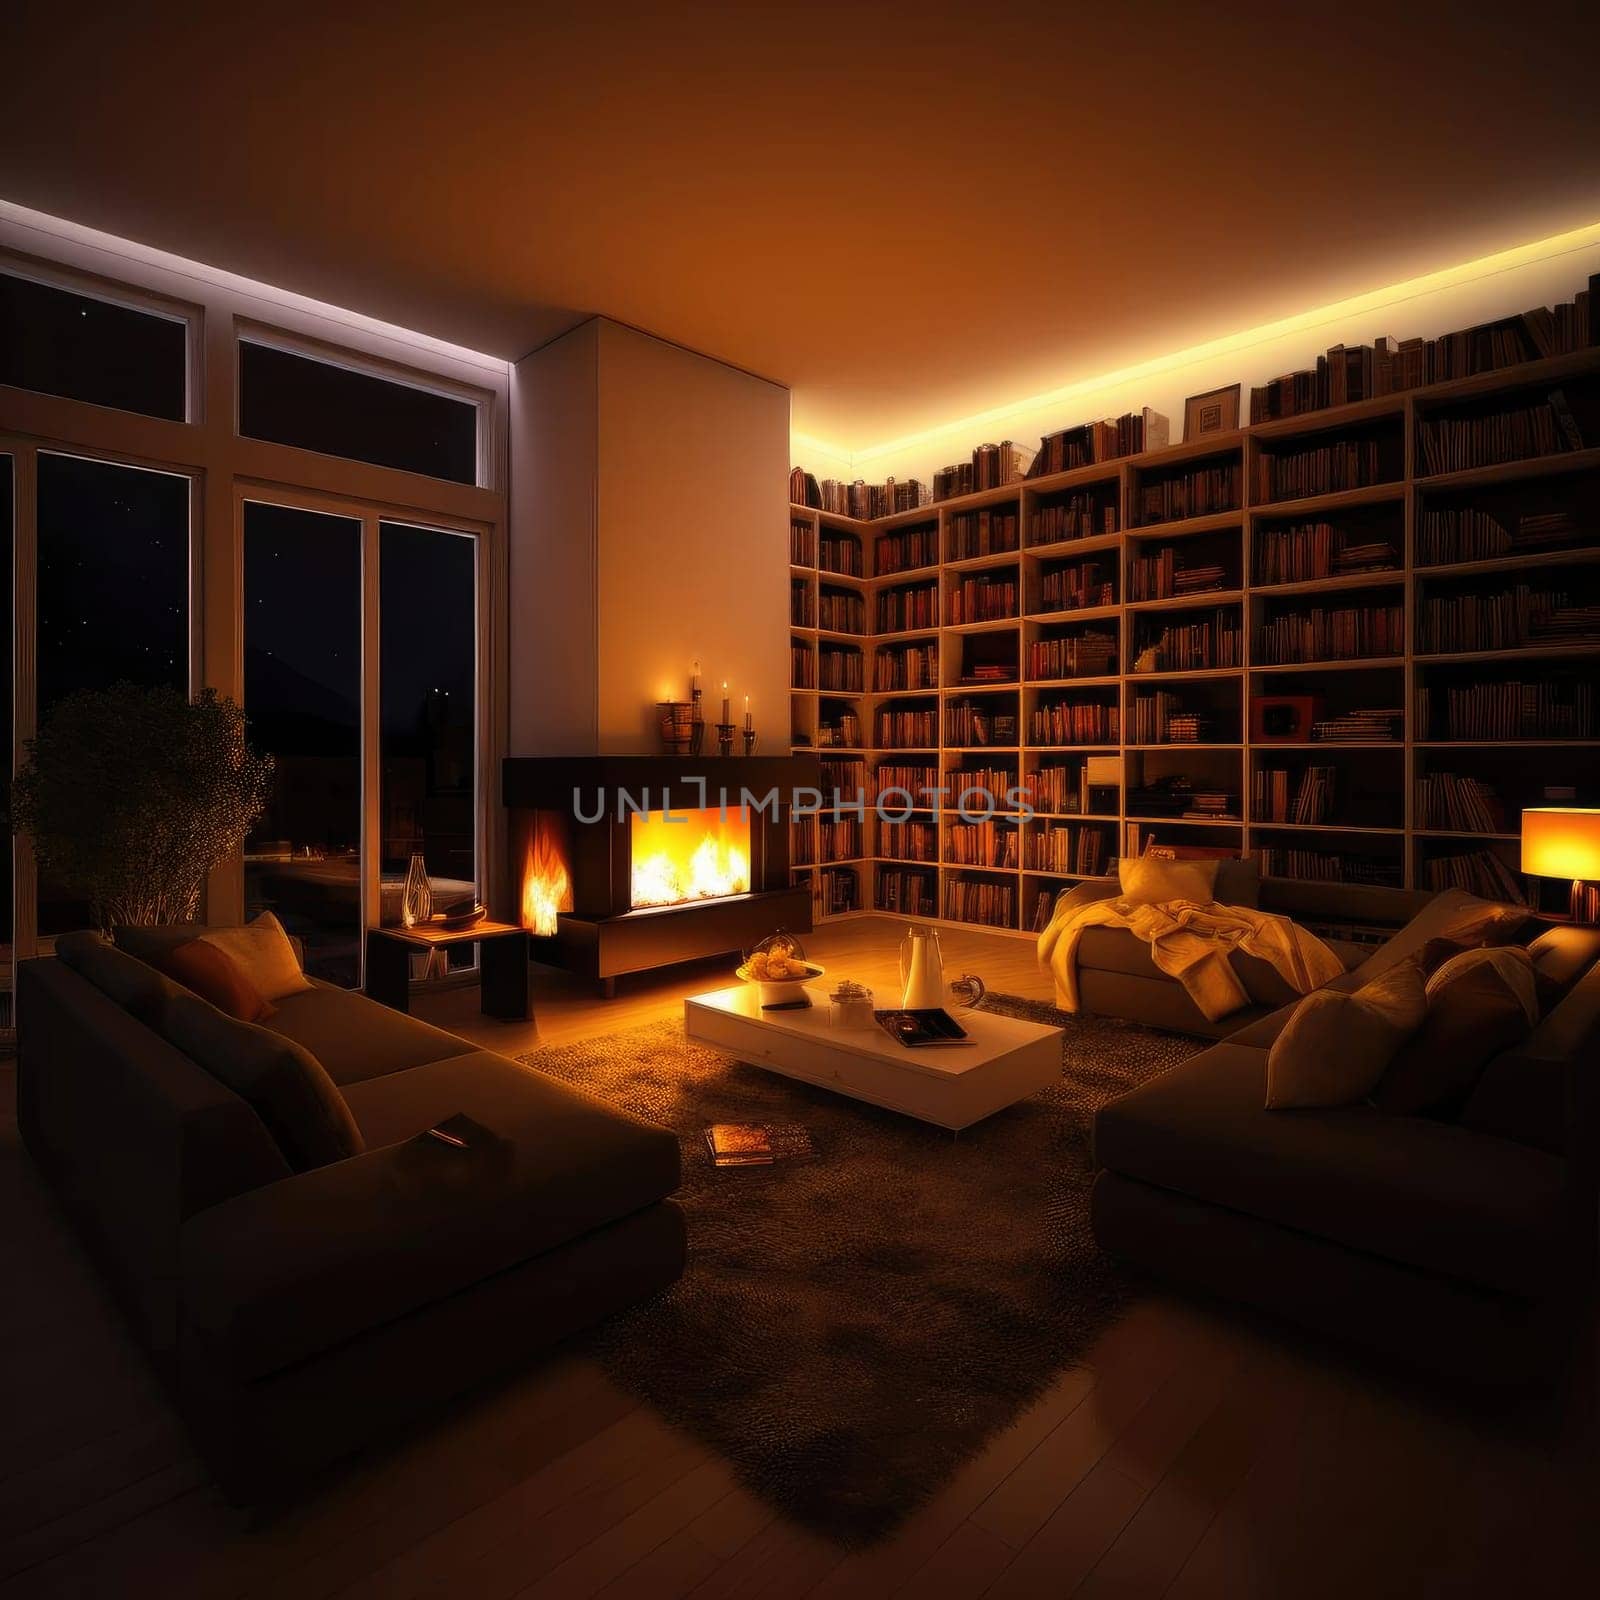 Interior of a living room with fireplace and bookshelf at night (ID: 001362)